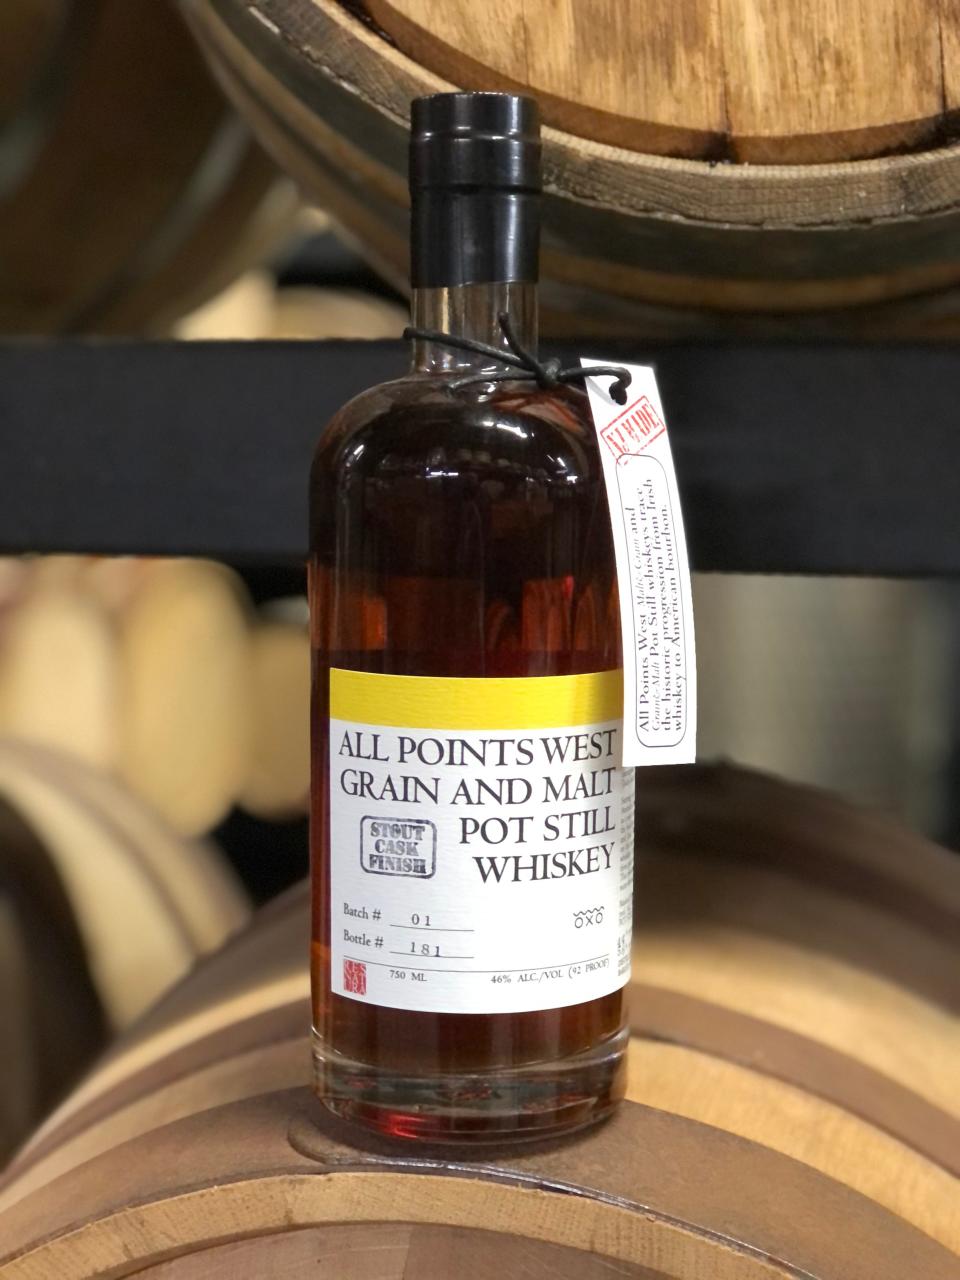 For the holidays, All Points West Distillery is offering a limited release of its grain and malt pot still whiskey, which was aged for 28 months and finished in Brix City Brewing's stout barrels.